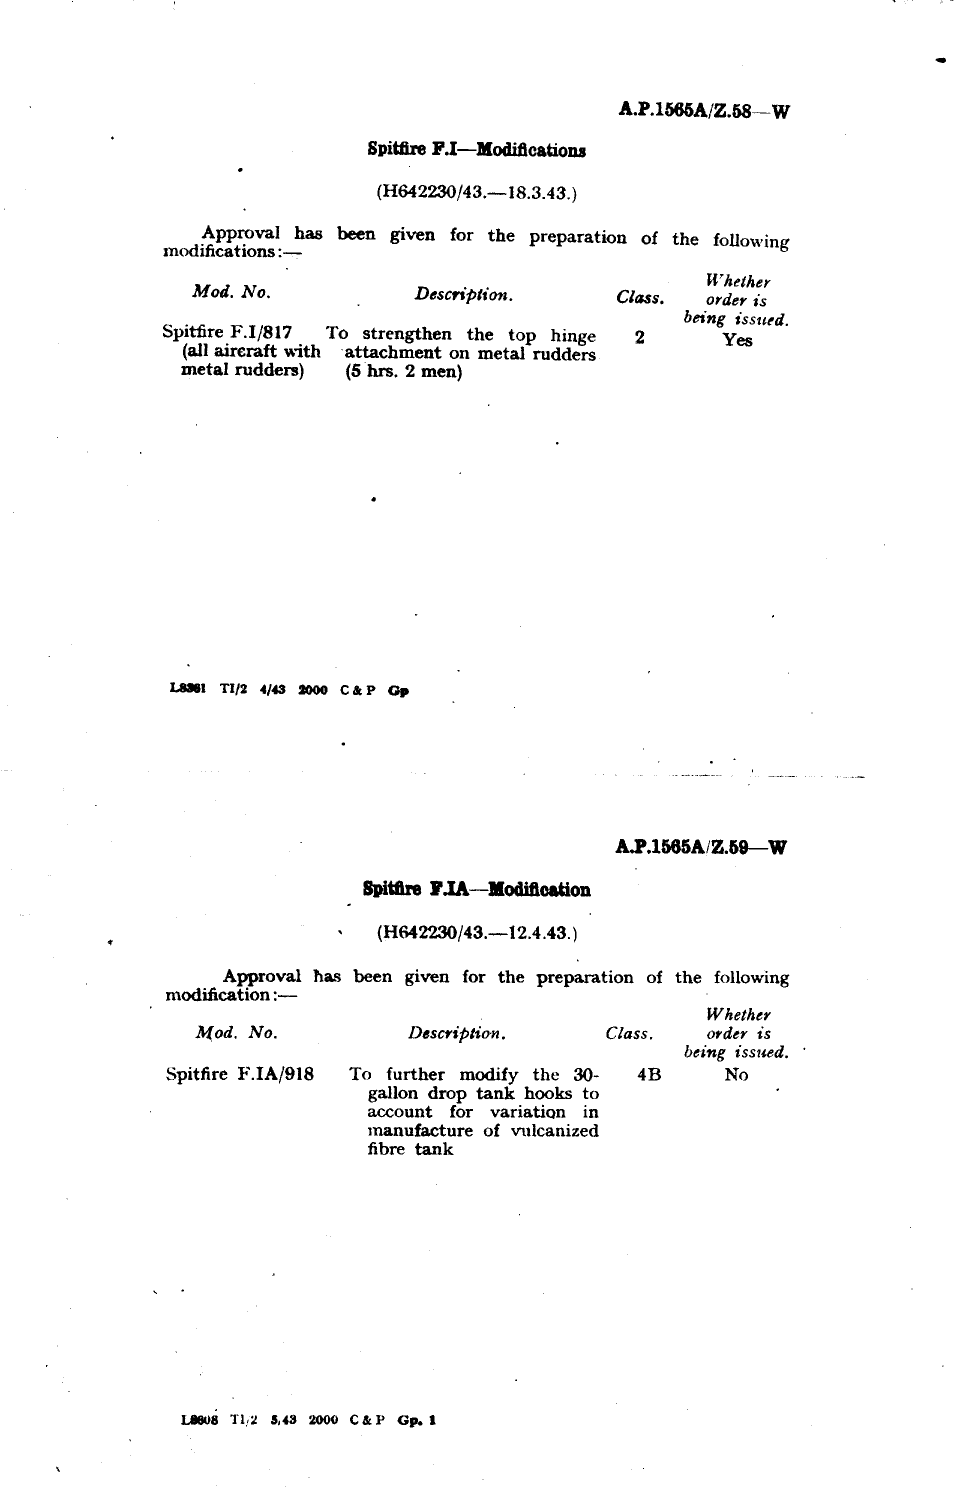 Sample page 1 from AirCorps Library document: Spitfire F.I Modification 817